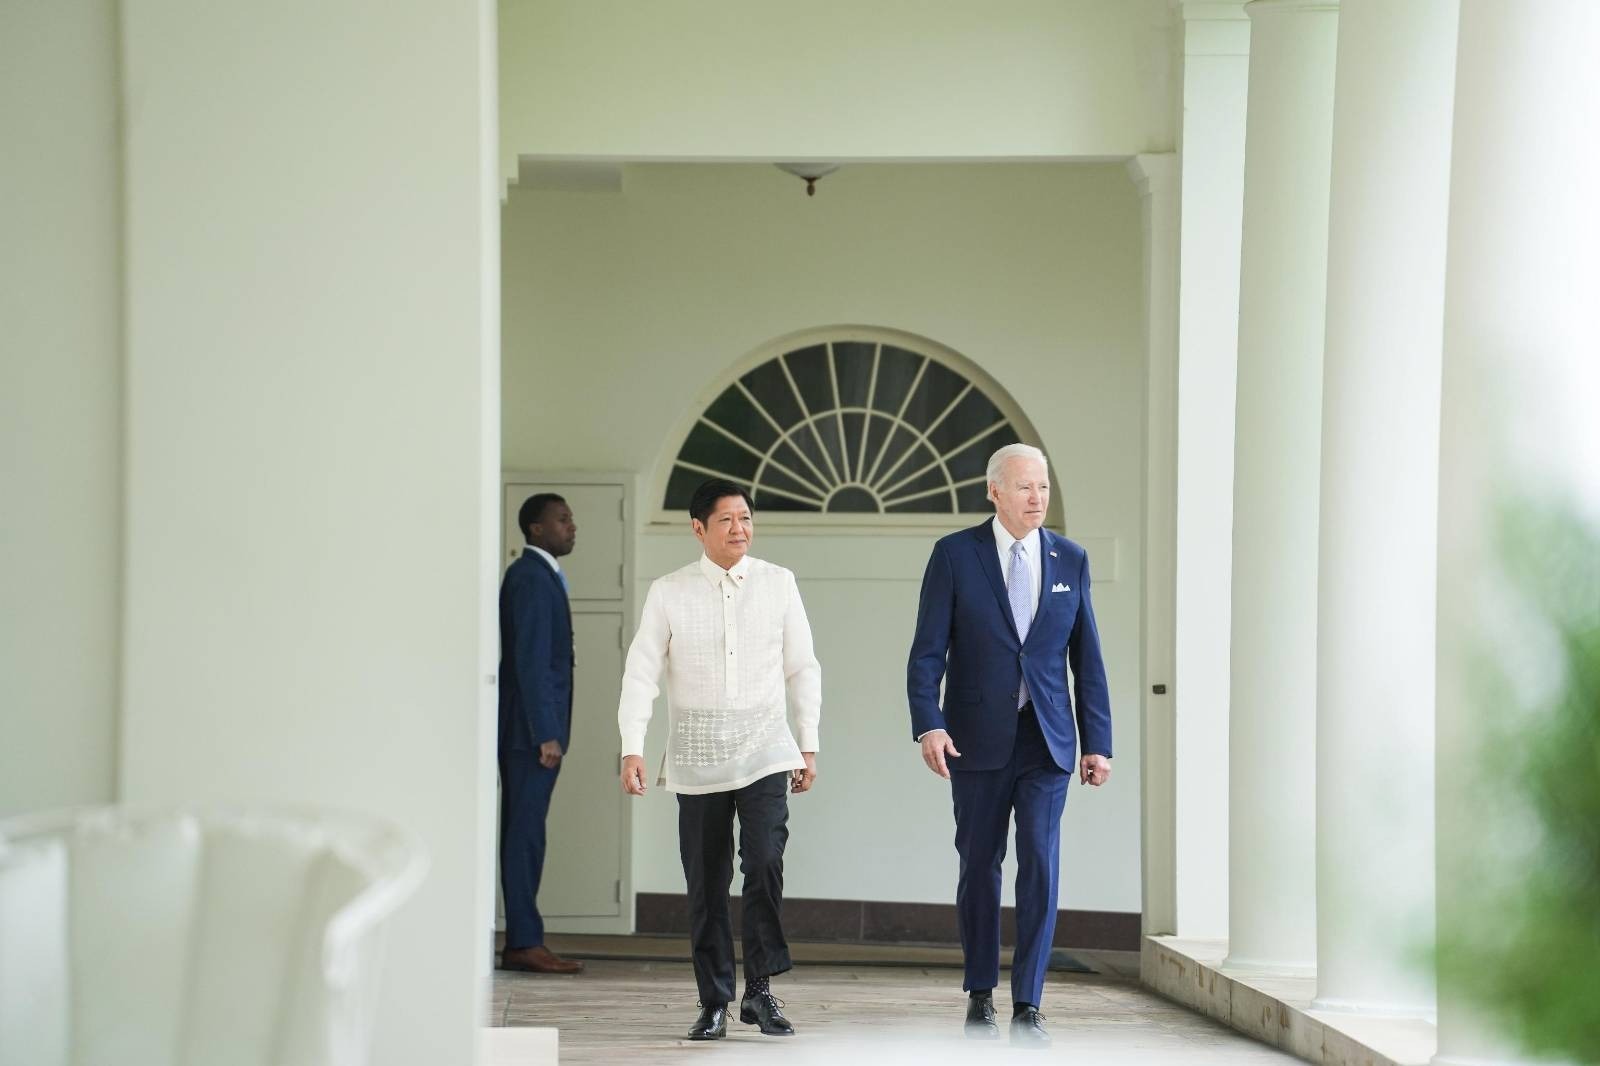 President Ferdinand “Bongbong” Marcos Jr. on Thursday (Friday, Manila time) said that relations between the Philippines and the US are “back on the normal role of partnership” with the recent “steady exchange of official engagements” at all levels of the government.